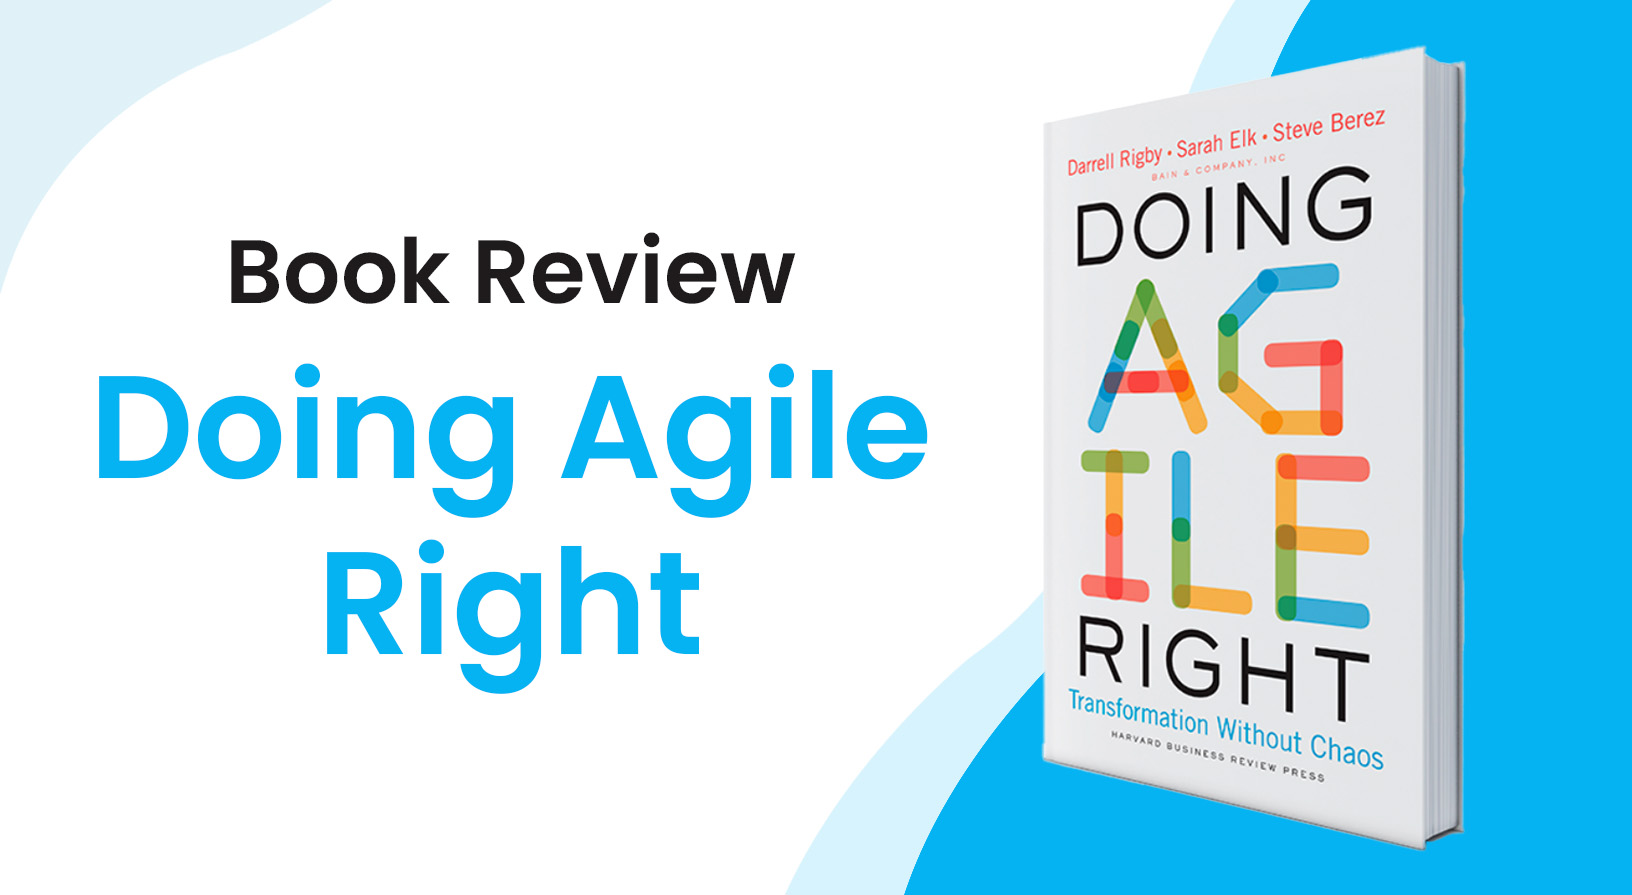 Doing Agile Right - A Book Review